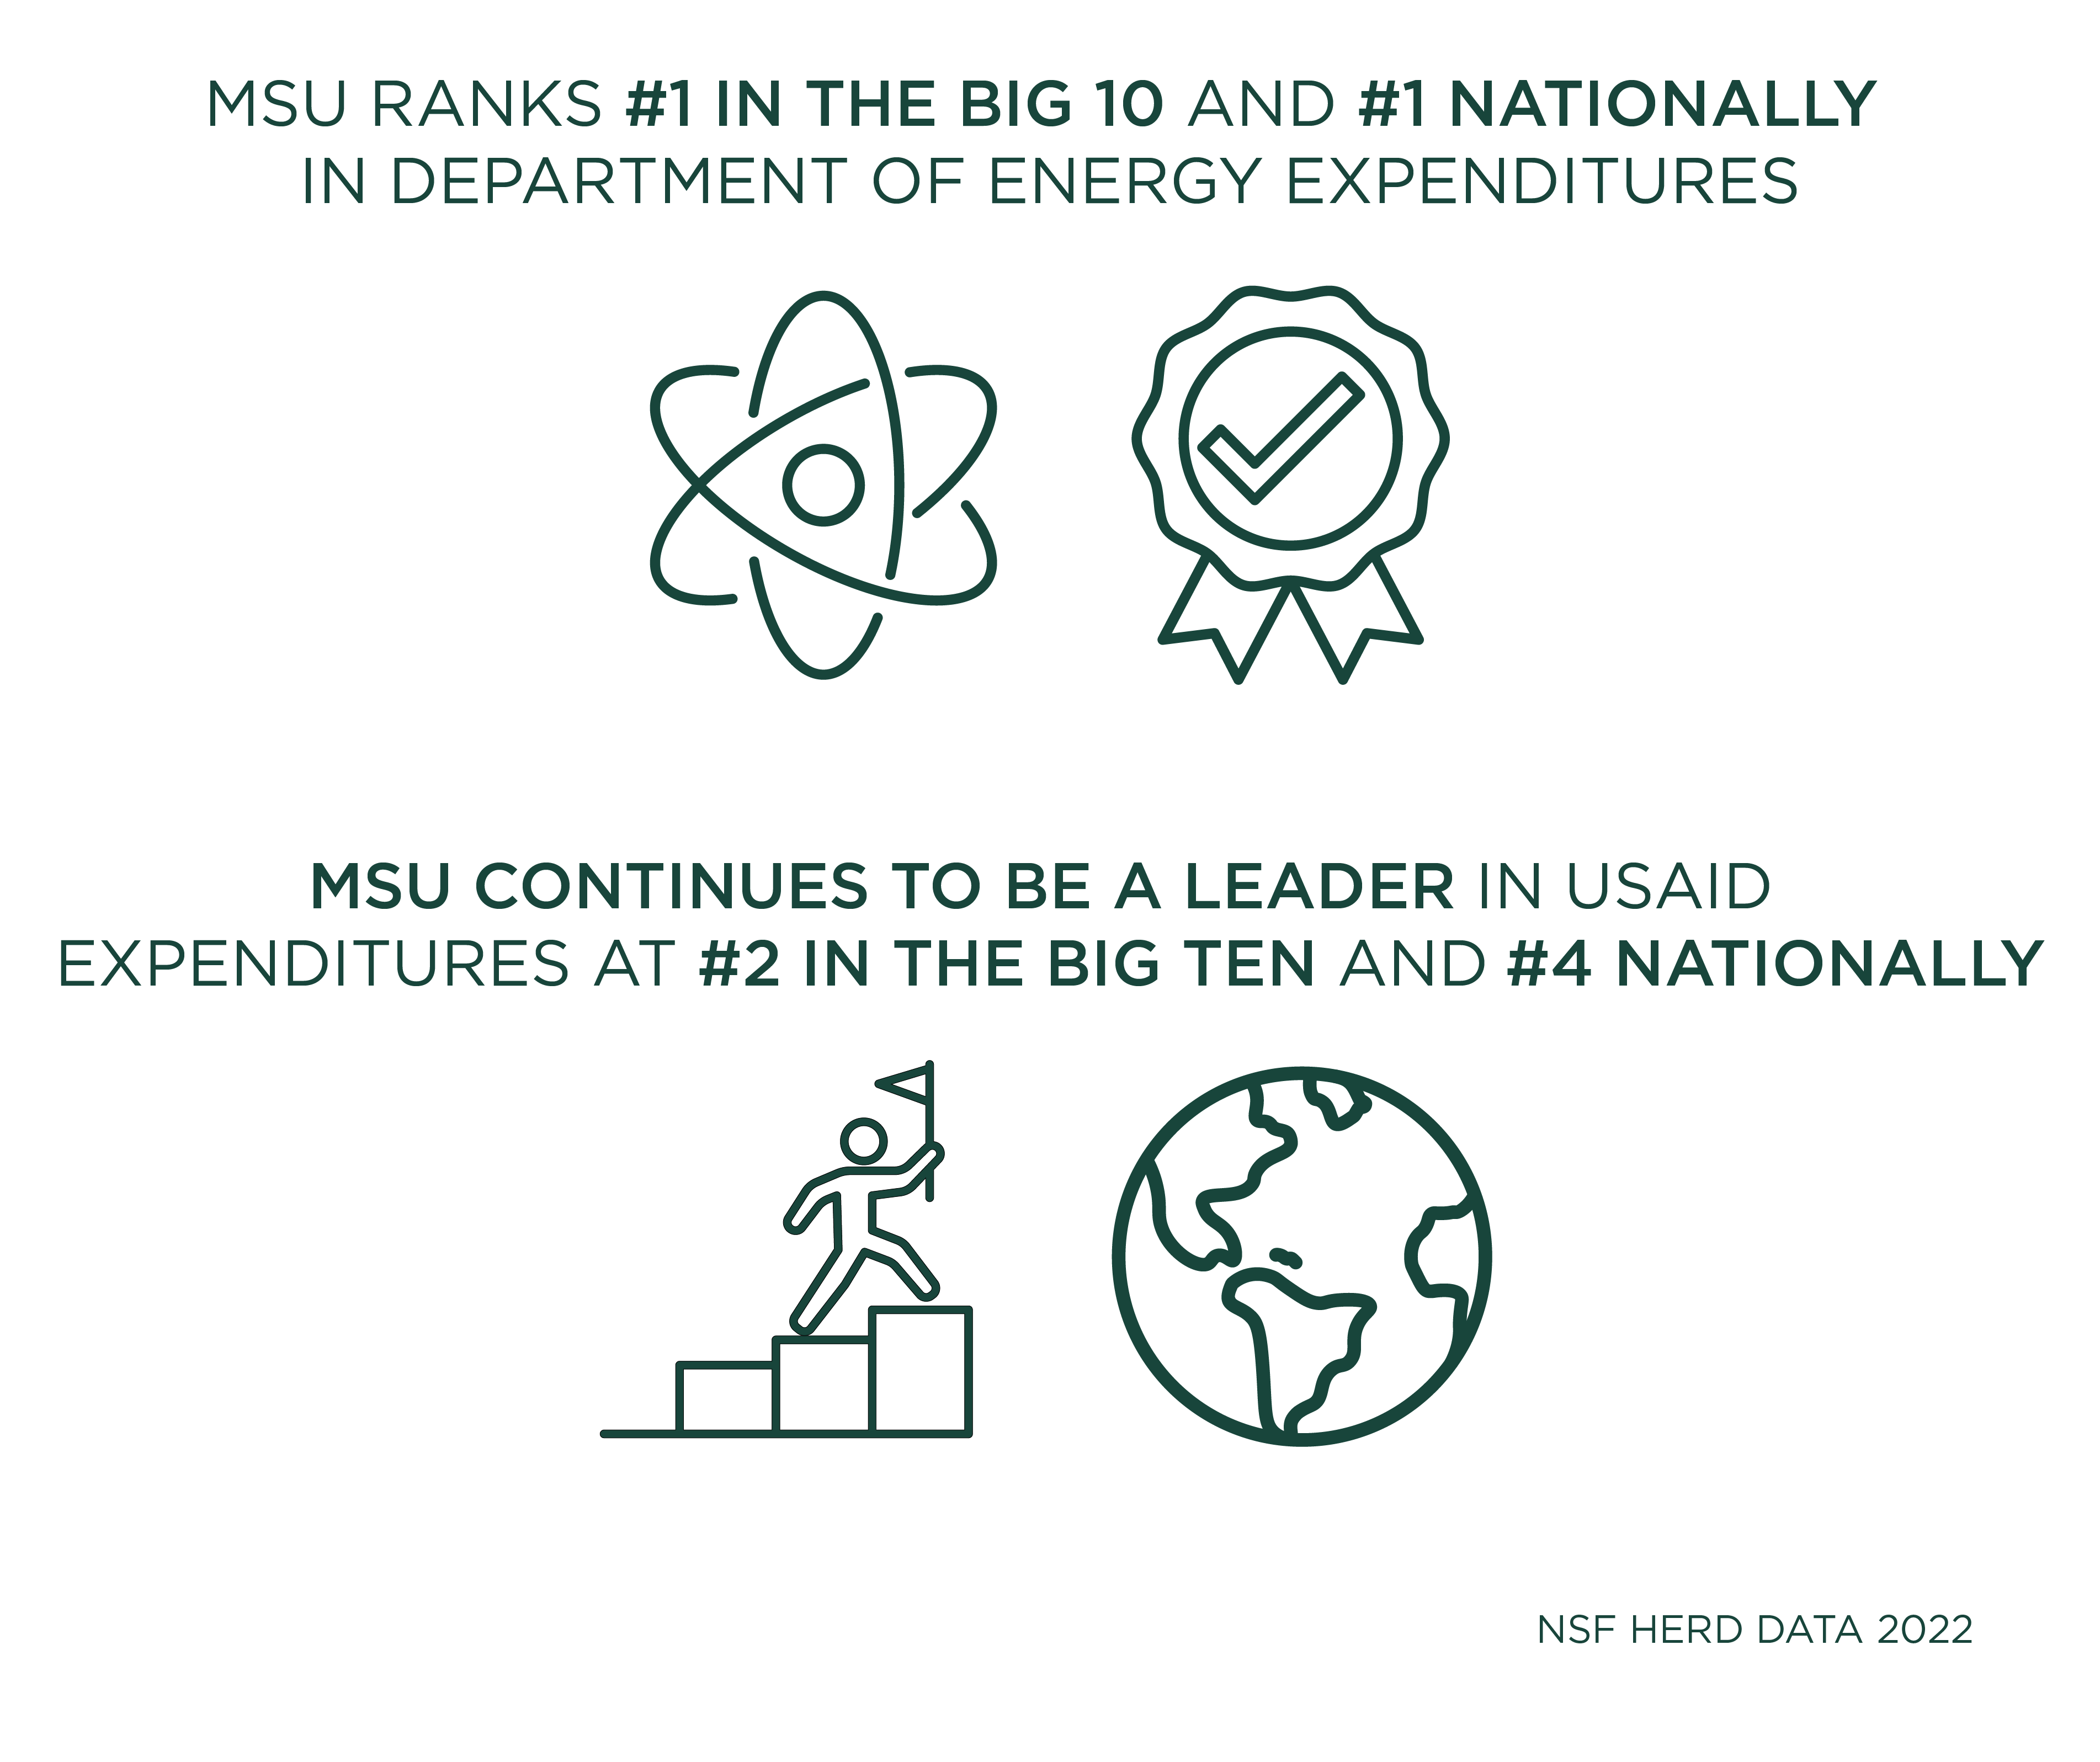 Rankings for MSU in Big 10 and nationally